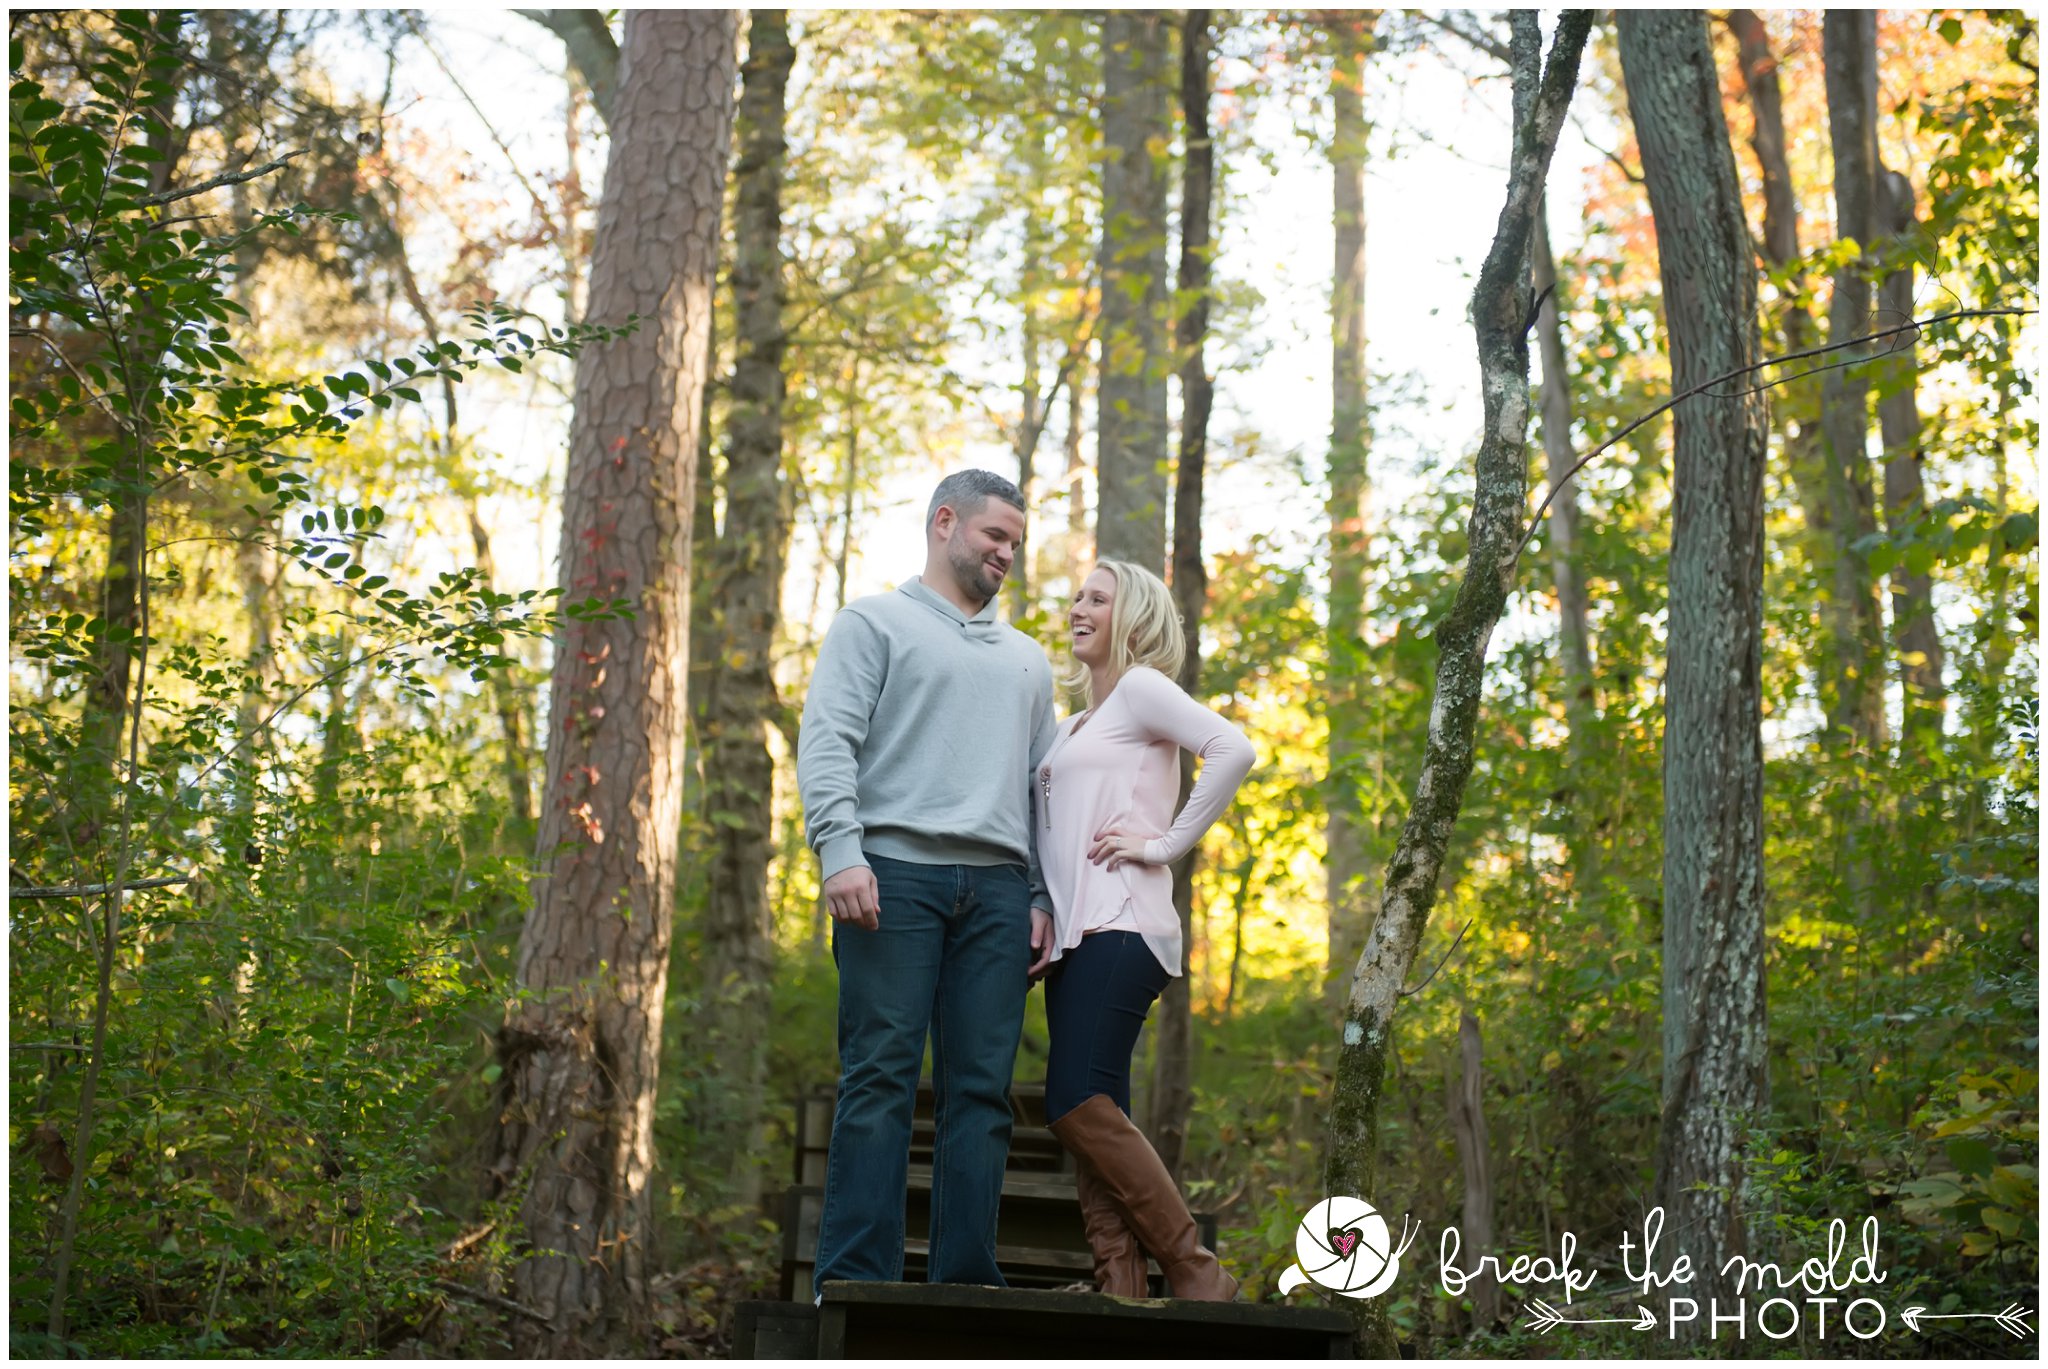 break-the-mold-photo-knoxville-tn-lenoir-city-downtown-outdoor-hiking-engagement-session_2001.jpg